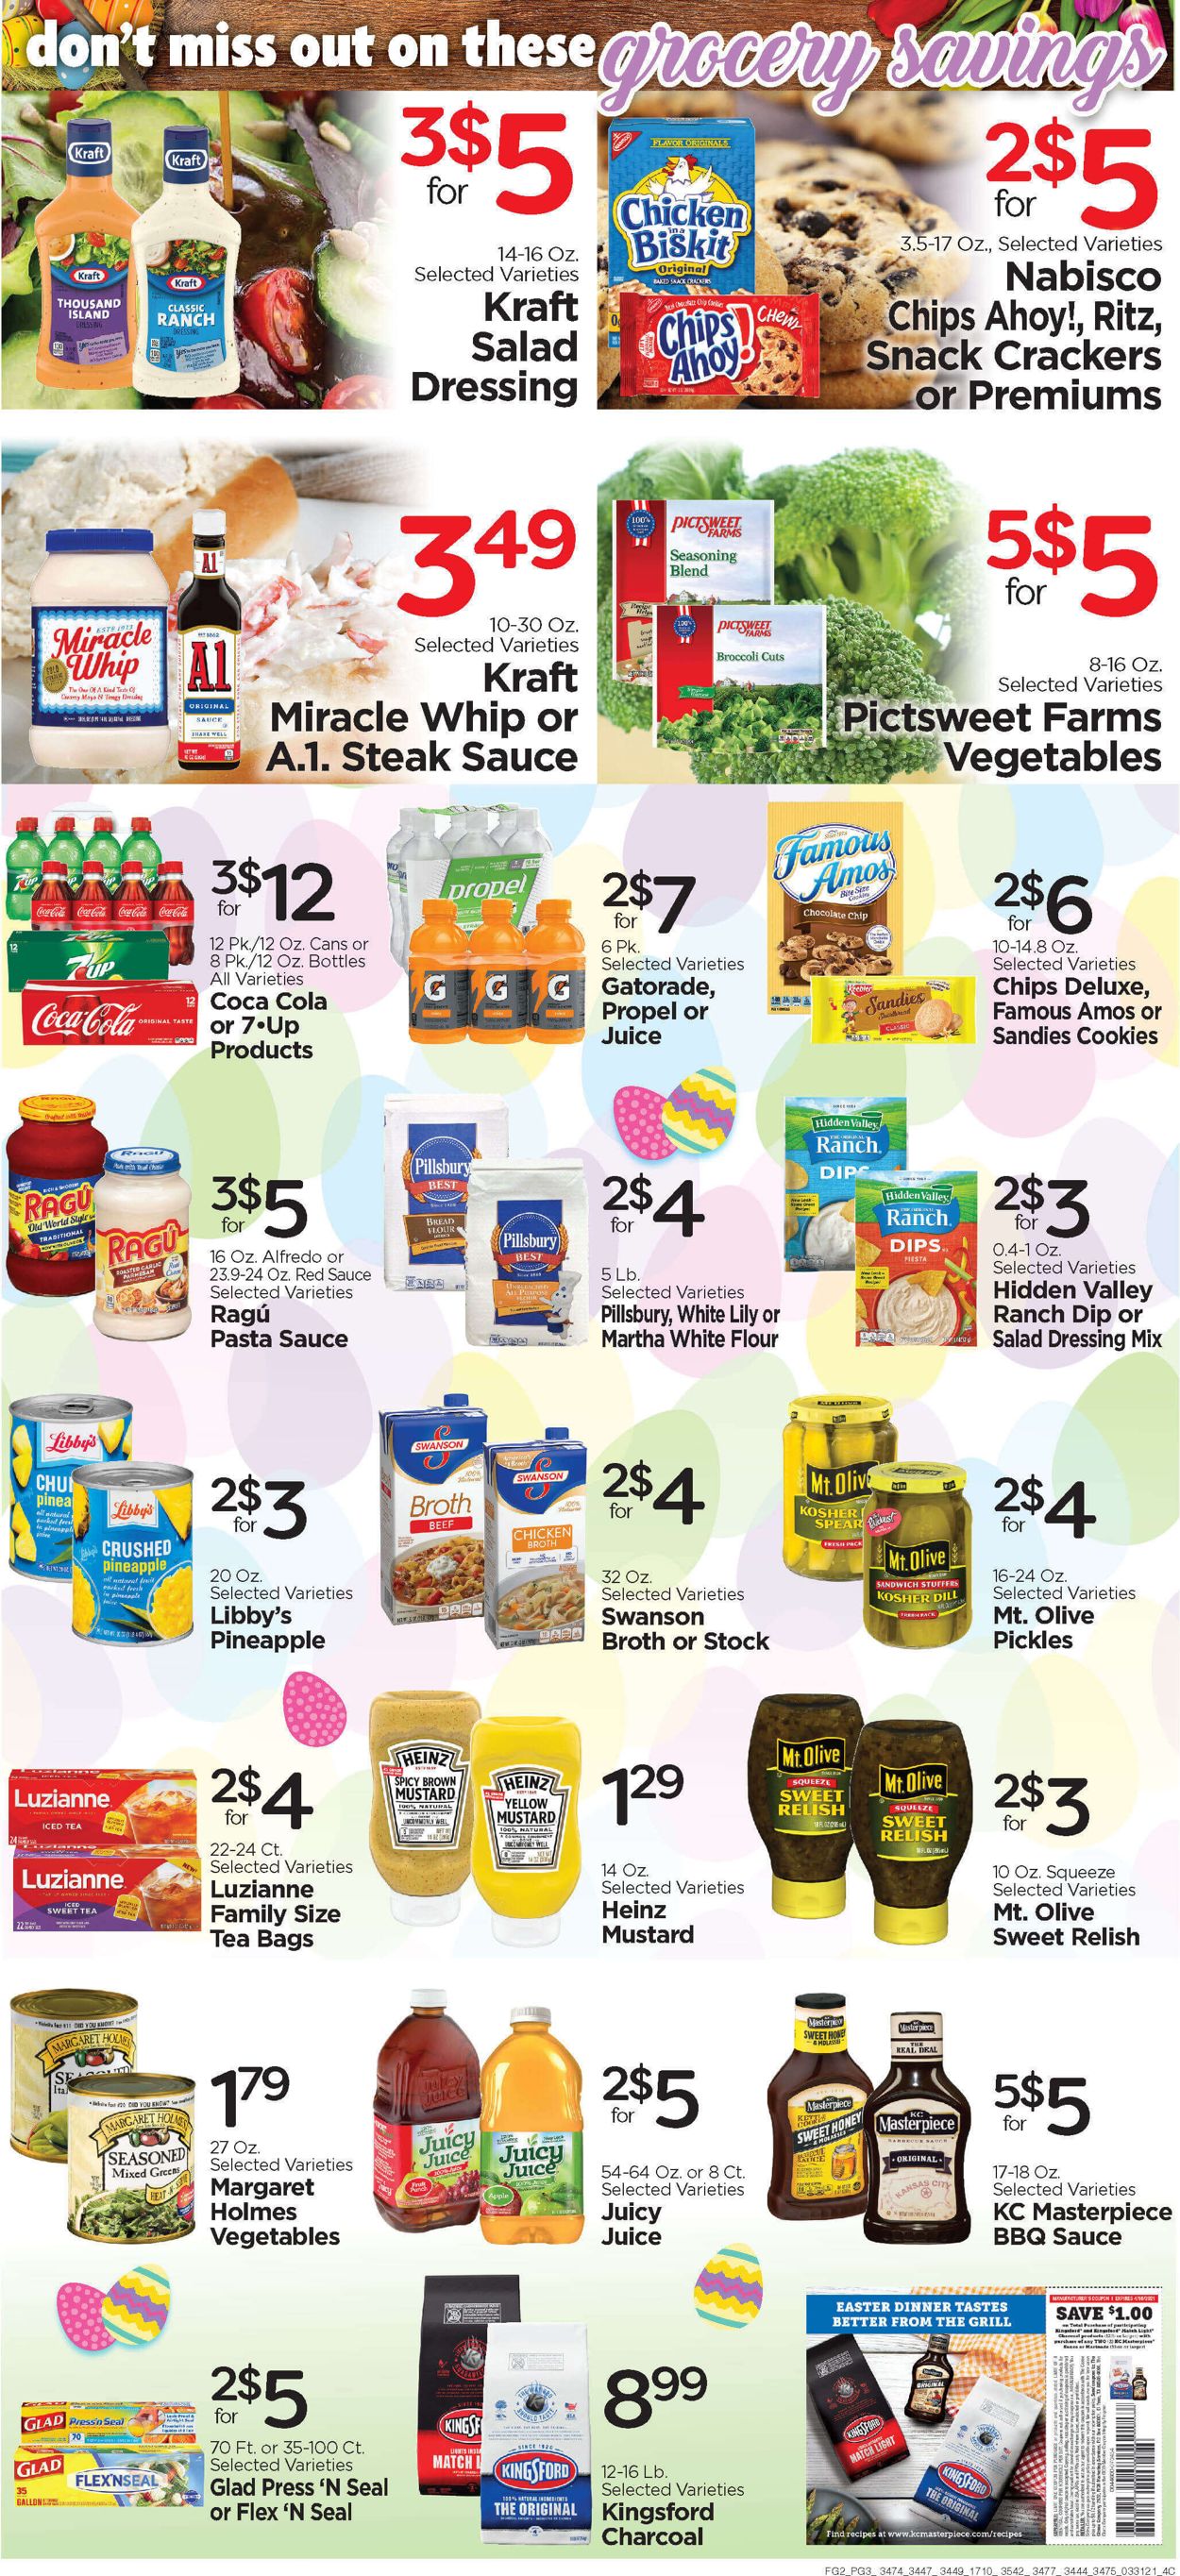 Catalogue Edwards Food Giant Easter 2021 ad from 03/31/2021